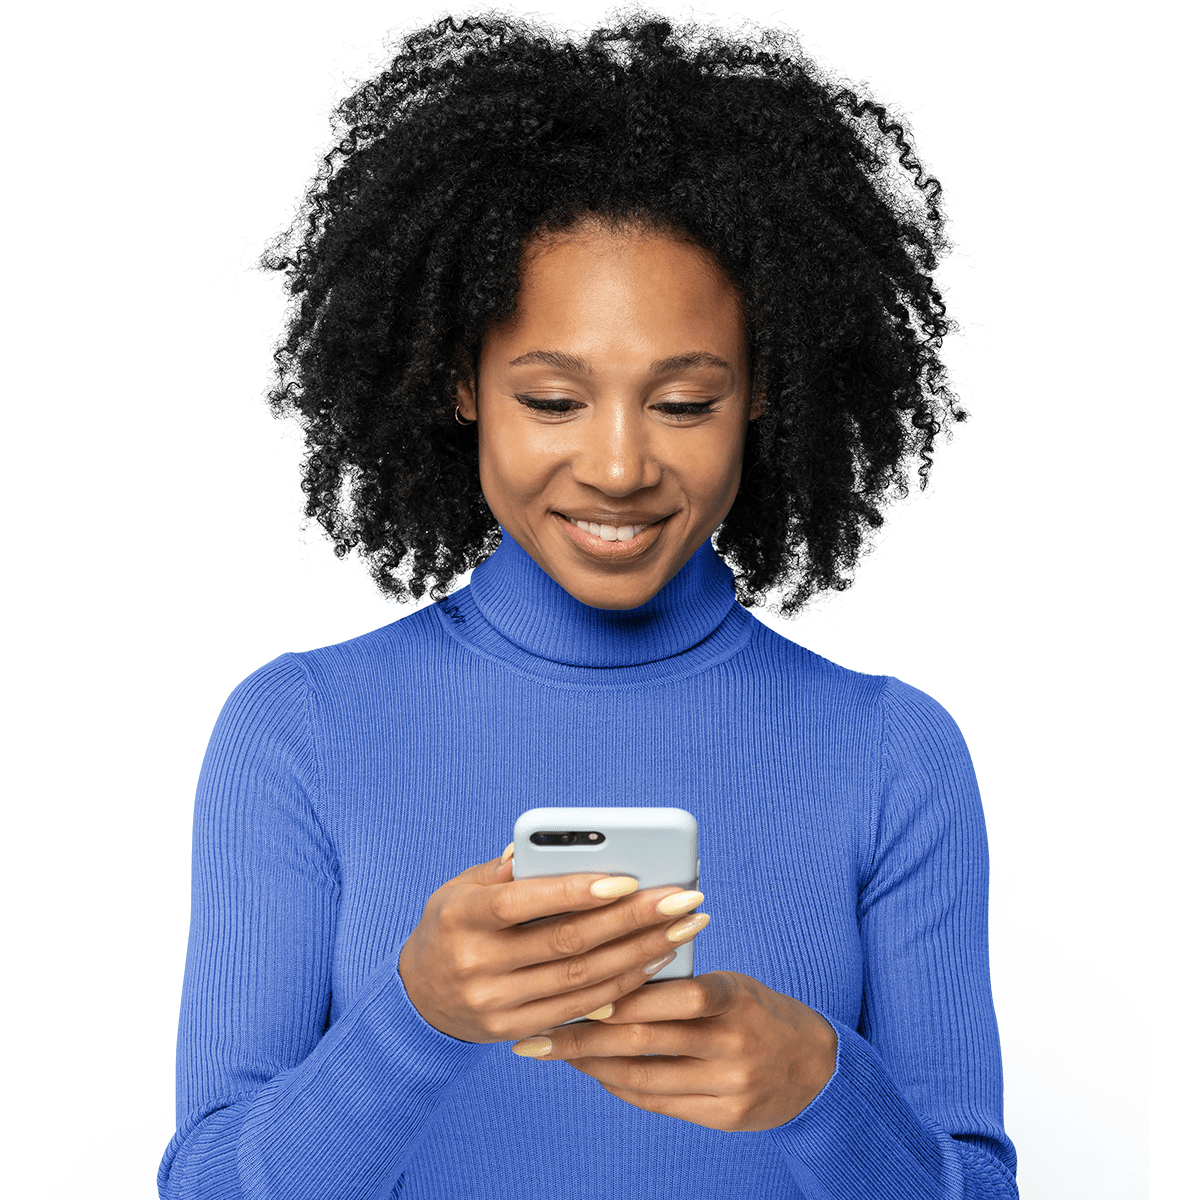 Smiling girl consulting a smartphone